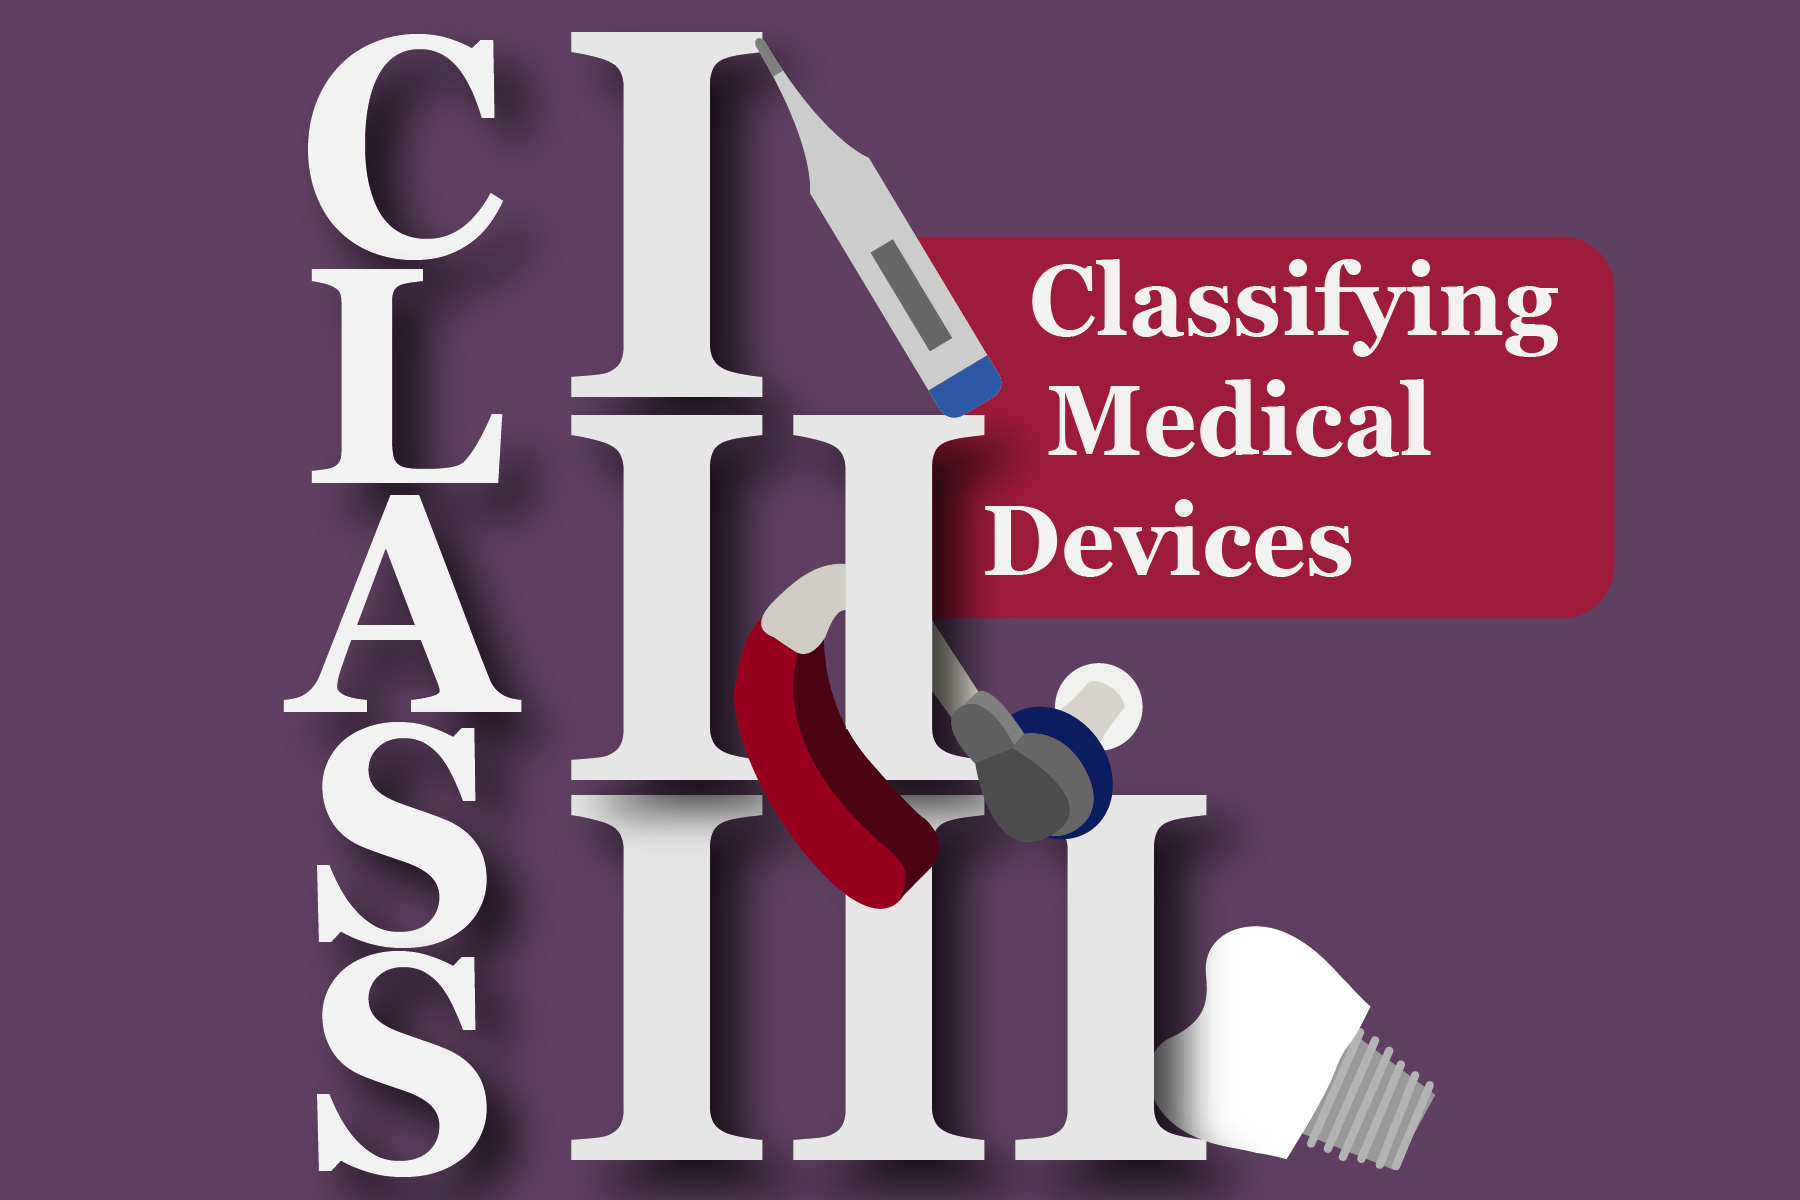 Classifying Medical Devices